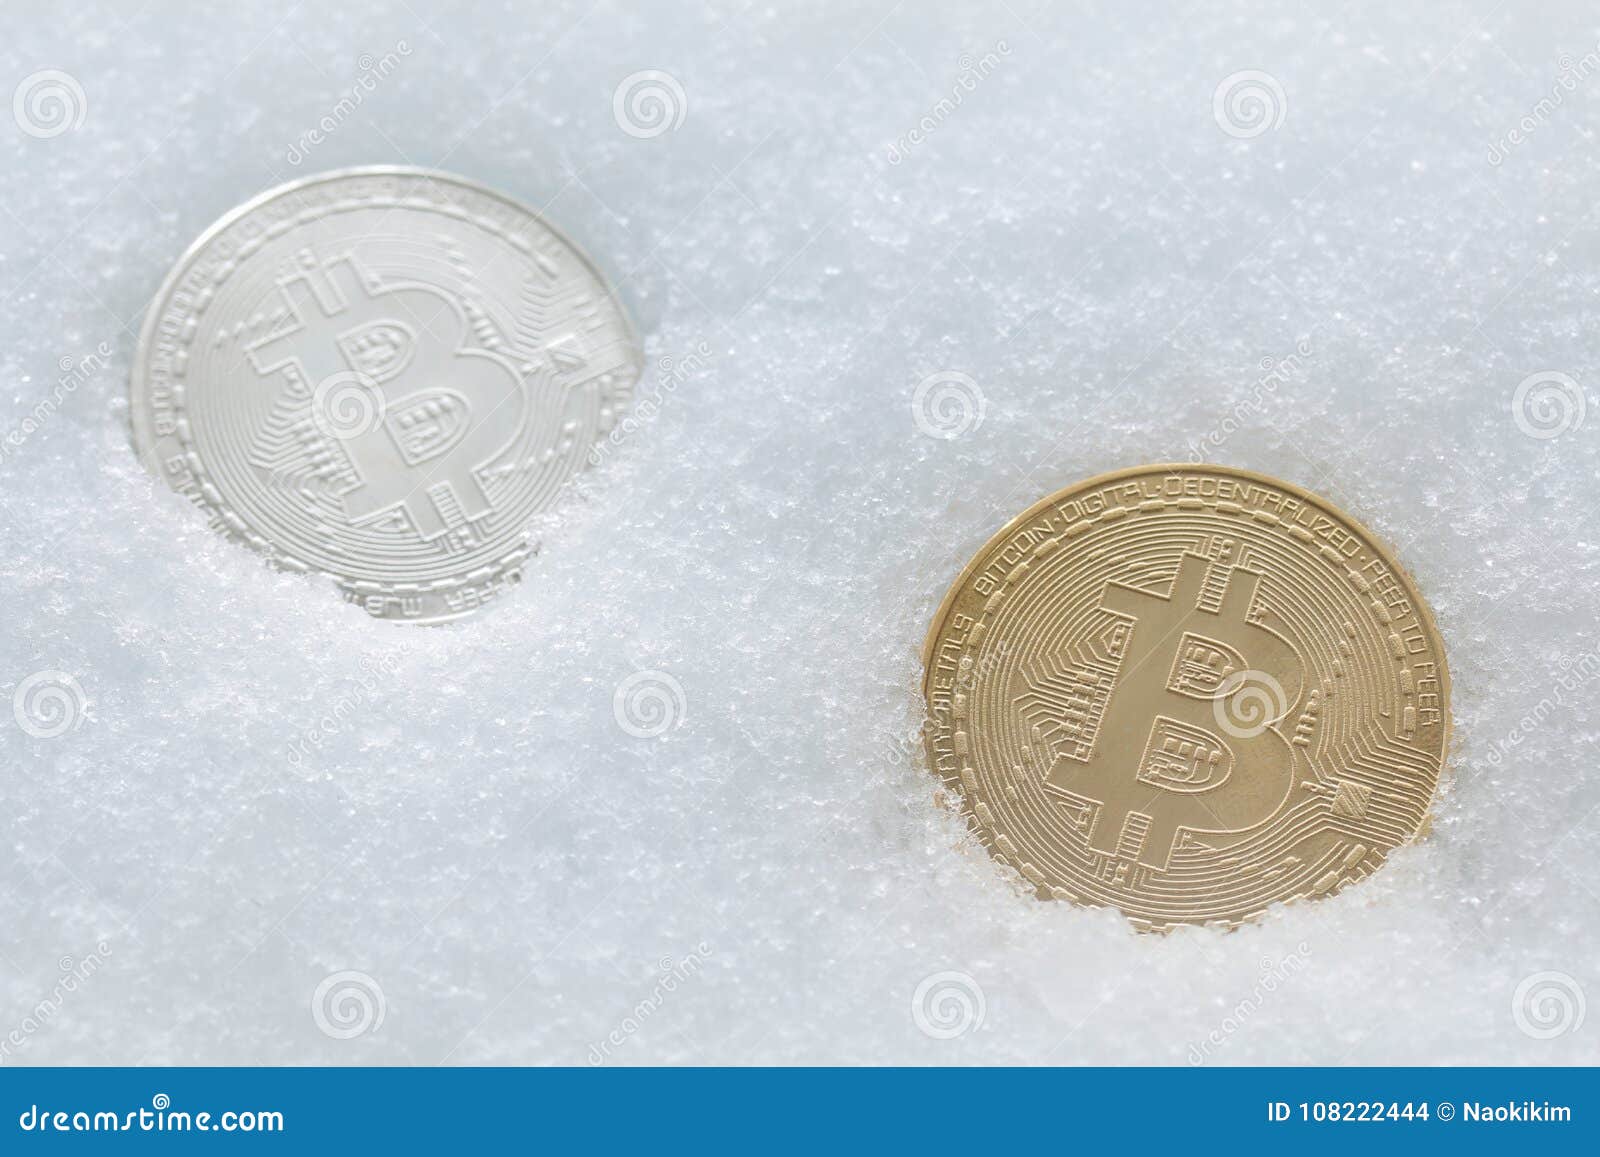 Gold Bitcoin On Cold Winter Snow Background Stock Photo ...